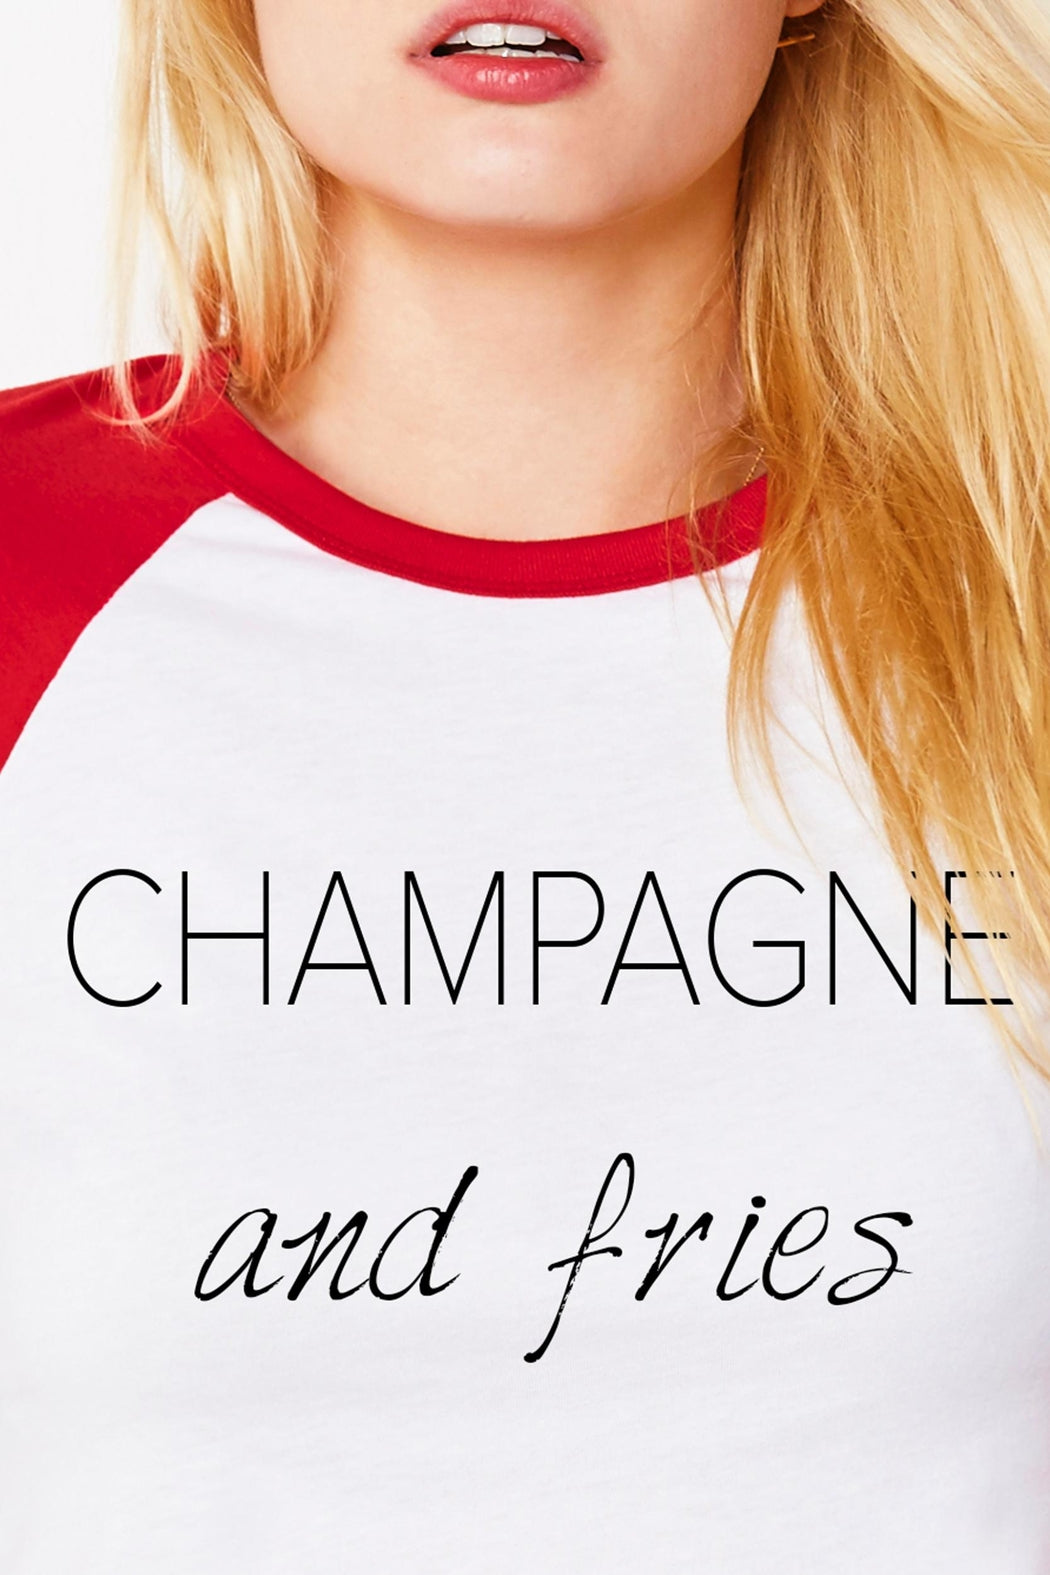 Champagne and Fries Tee - Adult